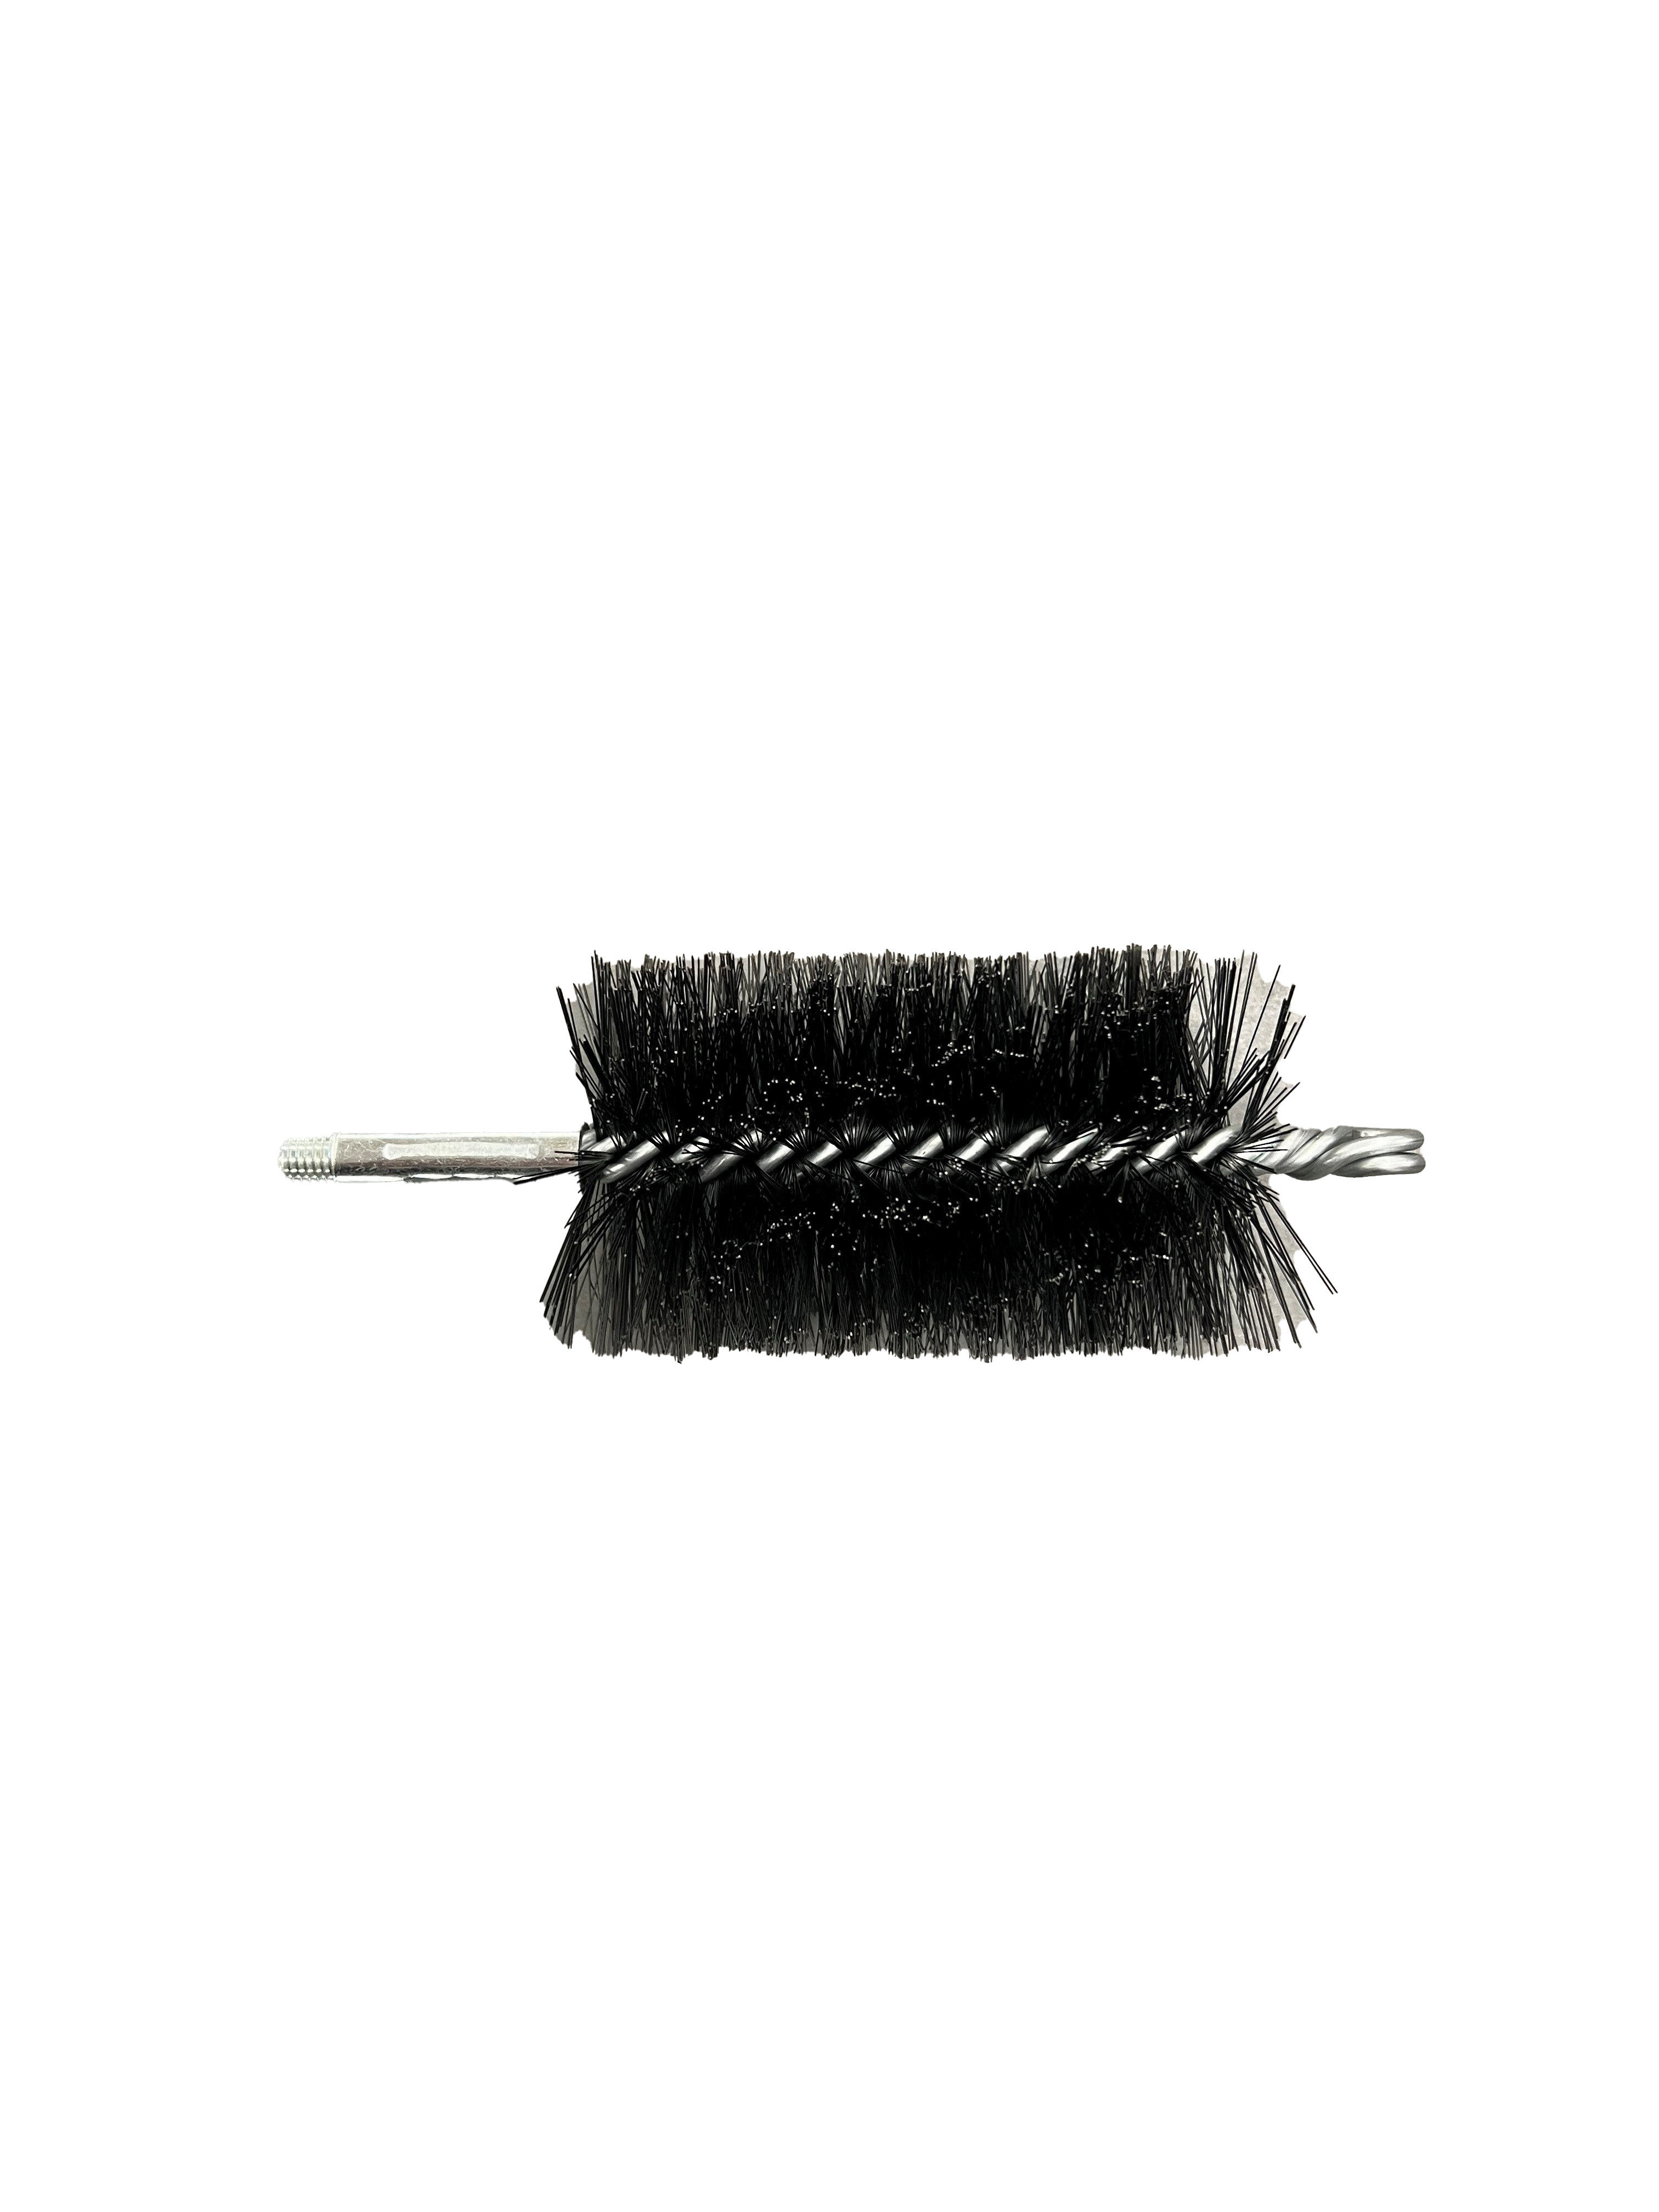 KlWY/SkuImages/da56531a-aa6c-4696-a10d-726f4dd32f97/round-brush-head.png